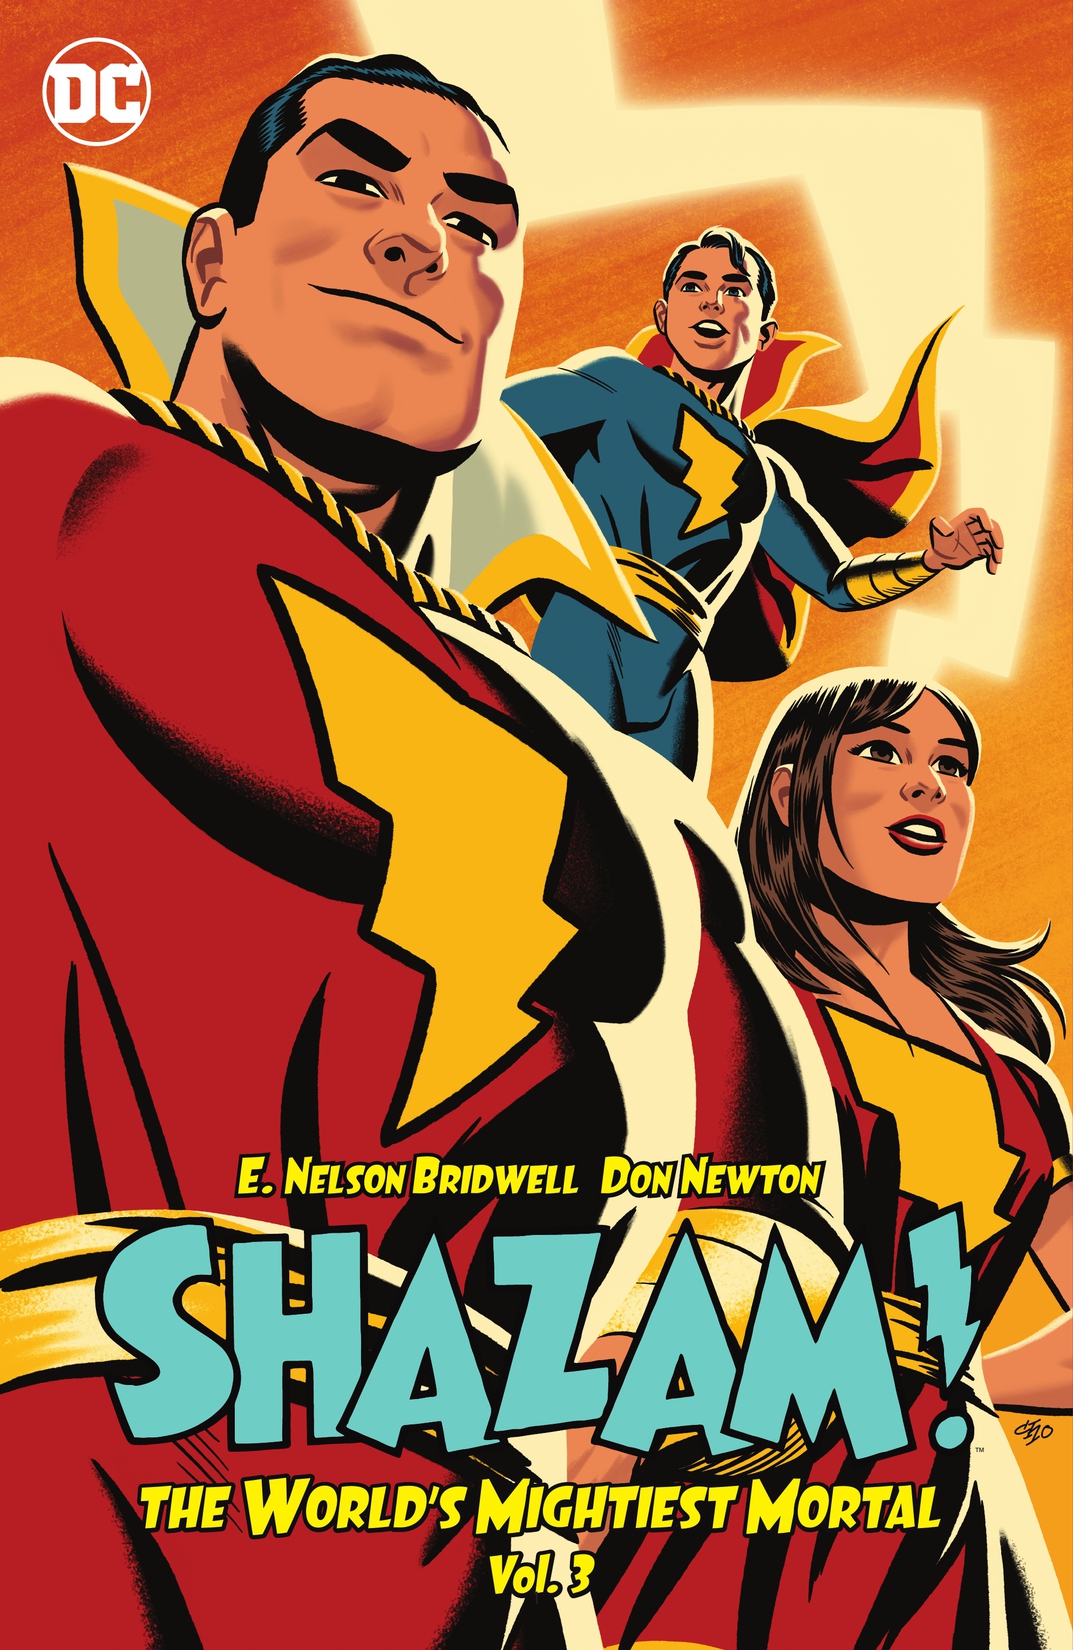 Shazam!: The World's Mightiest Mortal Vol. 3 preview images